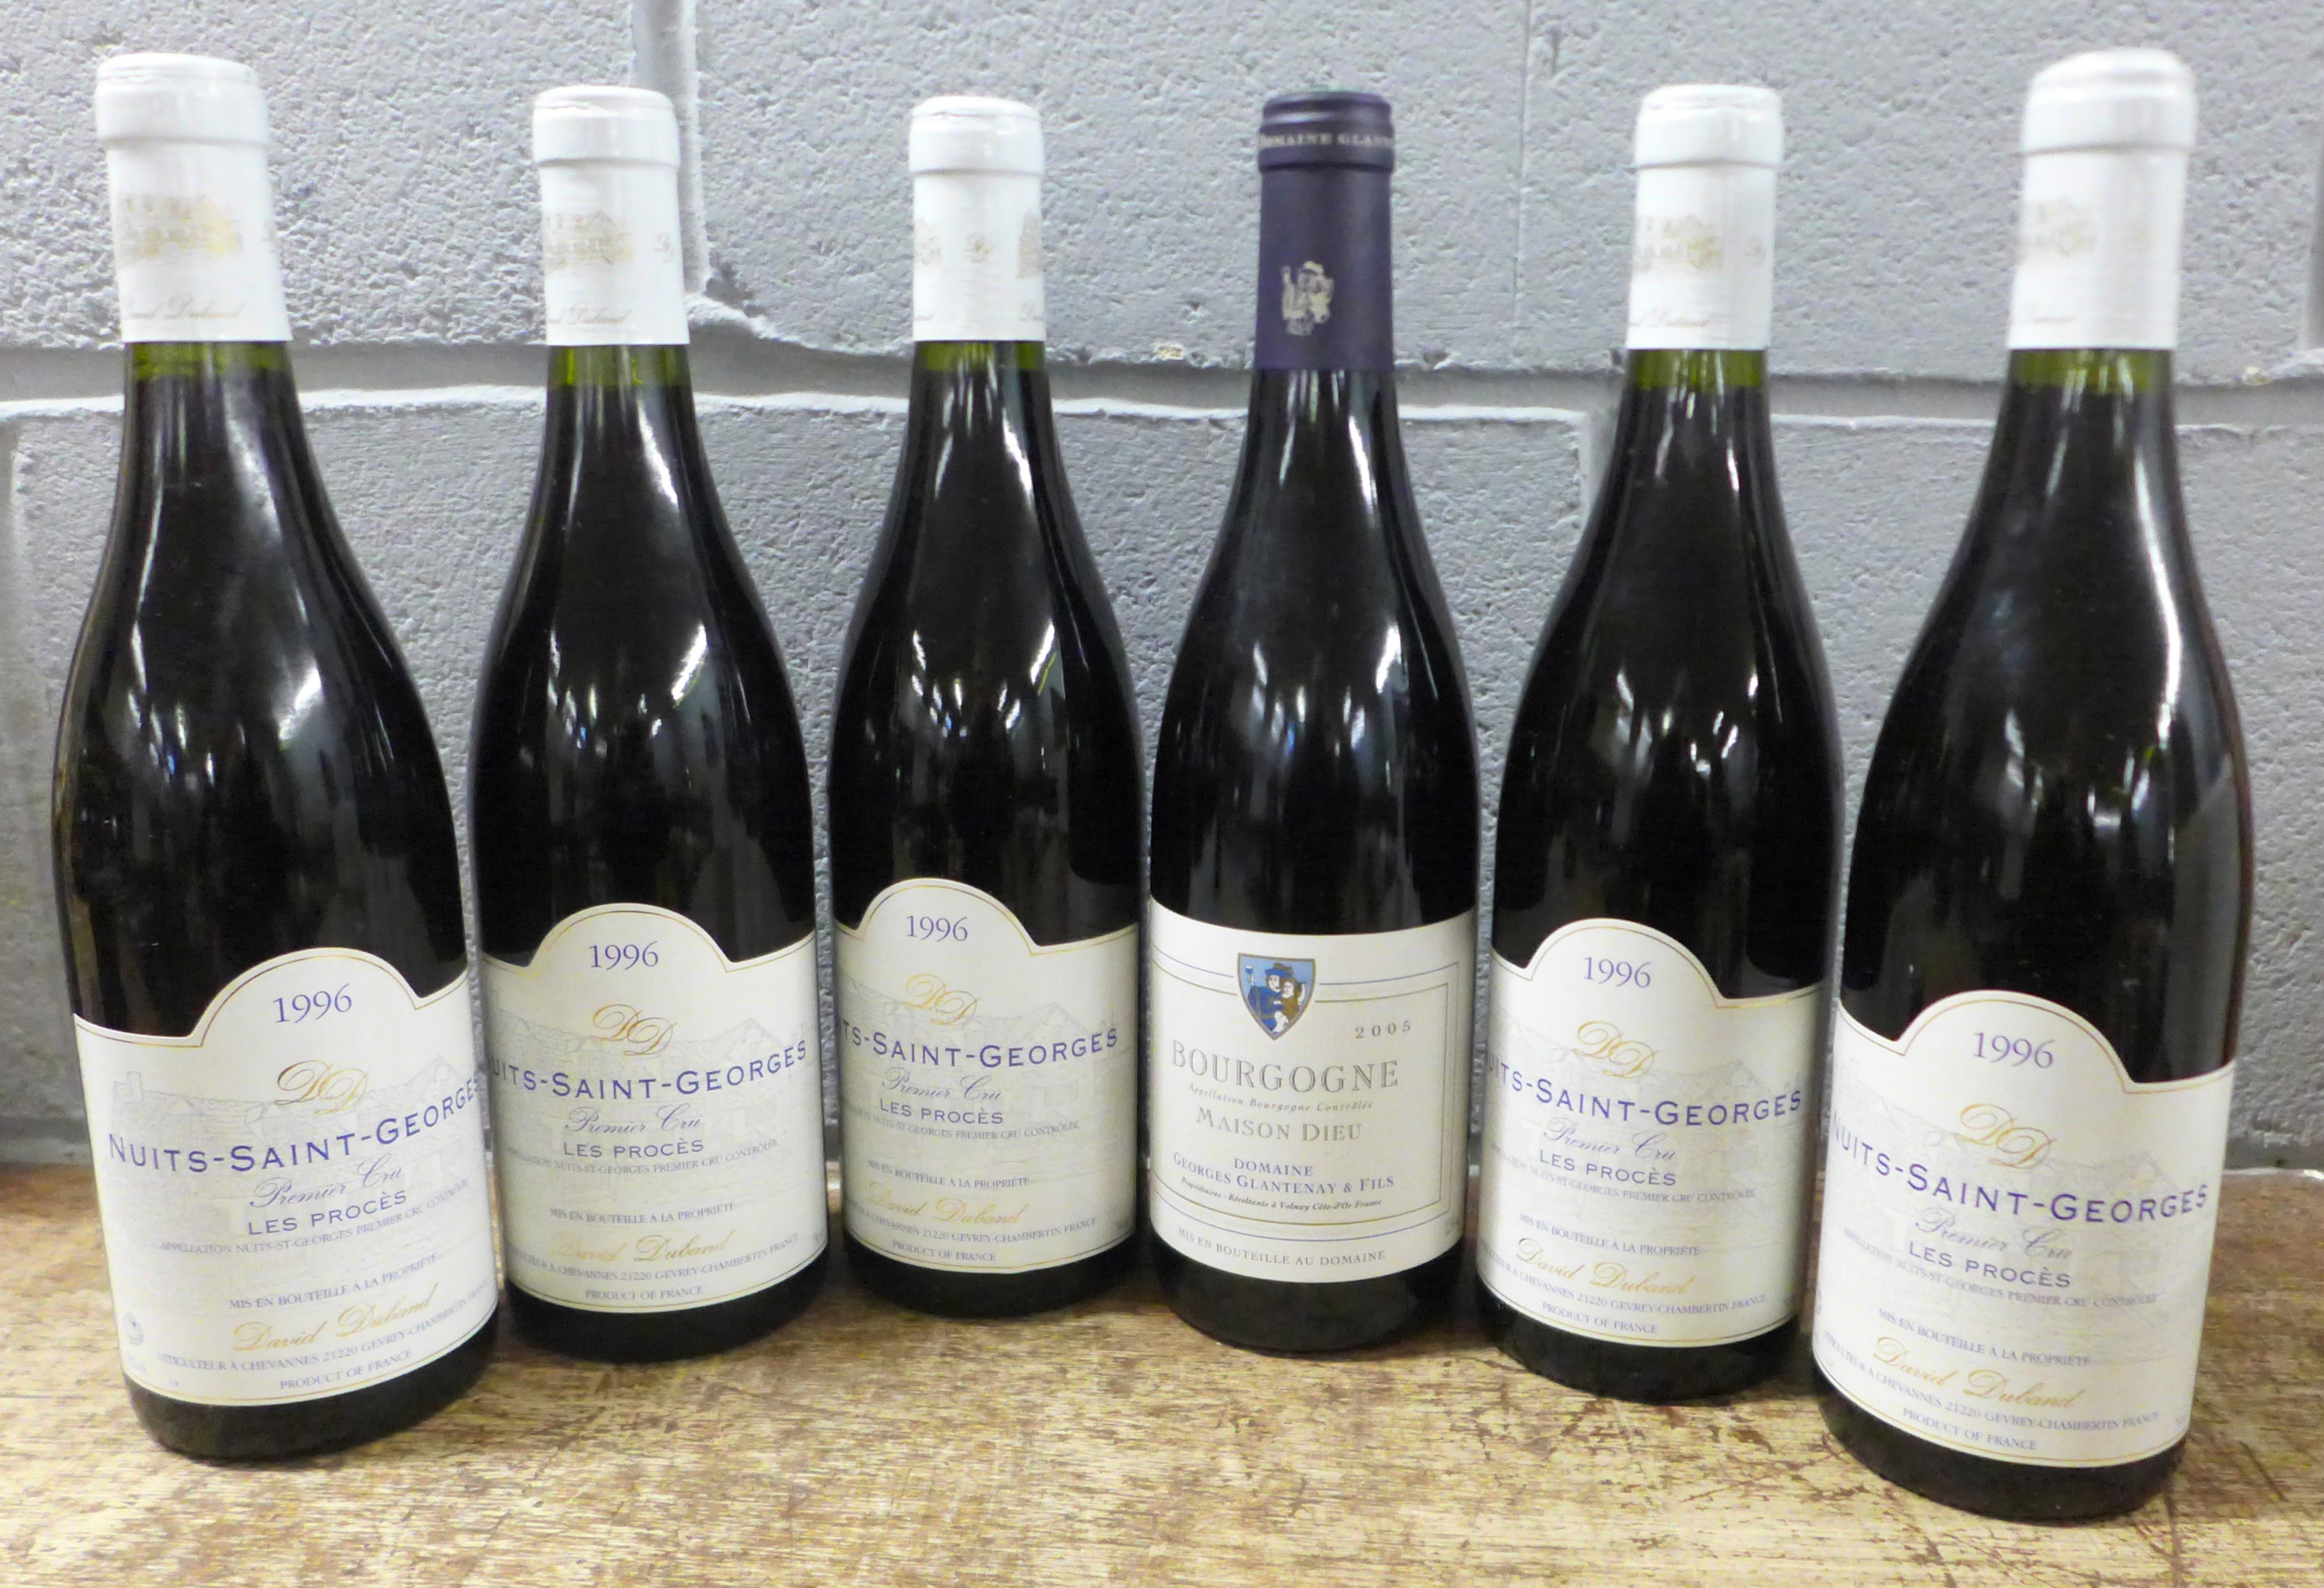 Five bottles of David Dubard Nuits-Saint-Georges 1996 and a bottle of Georges Glantenay and Fils